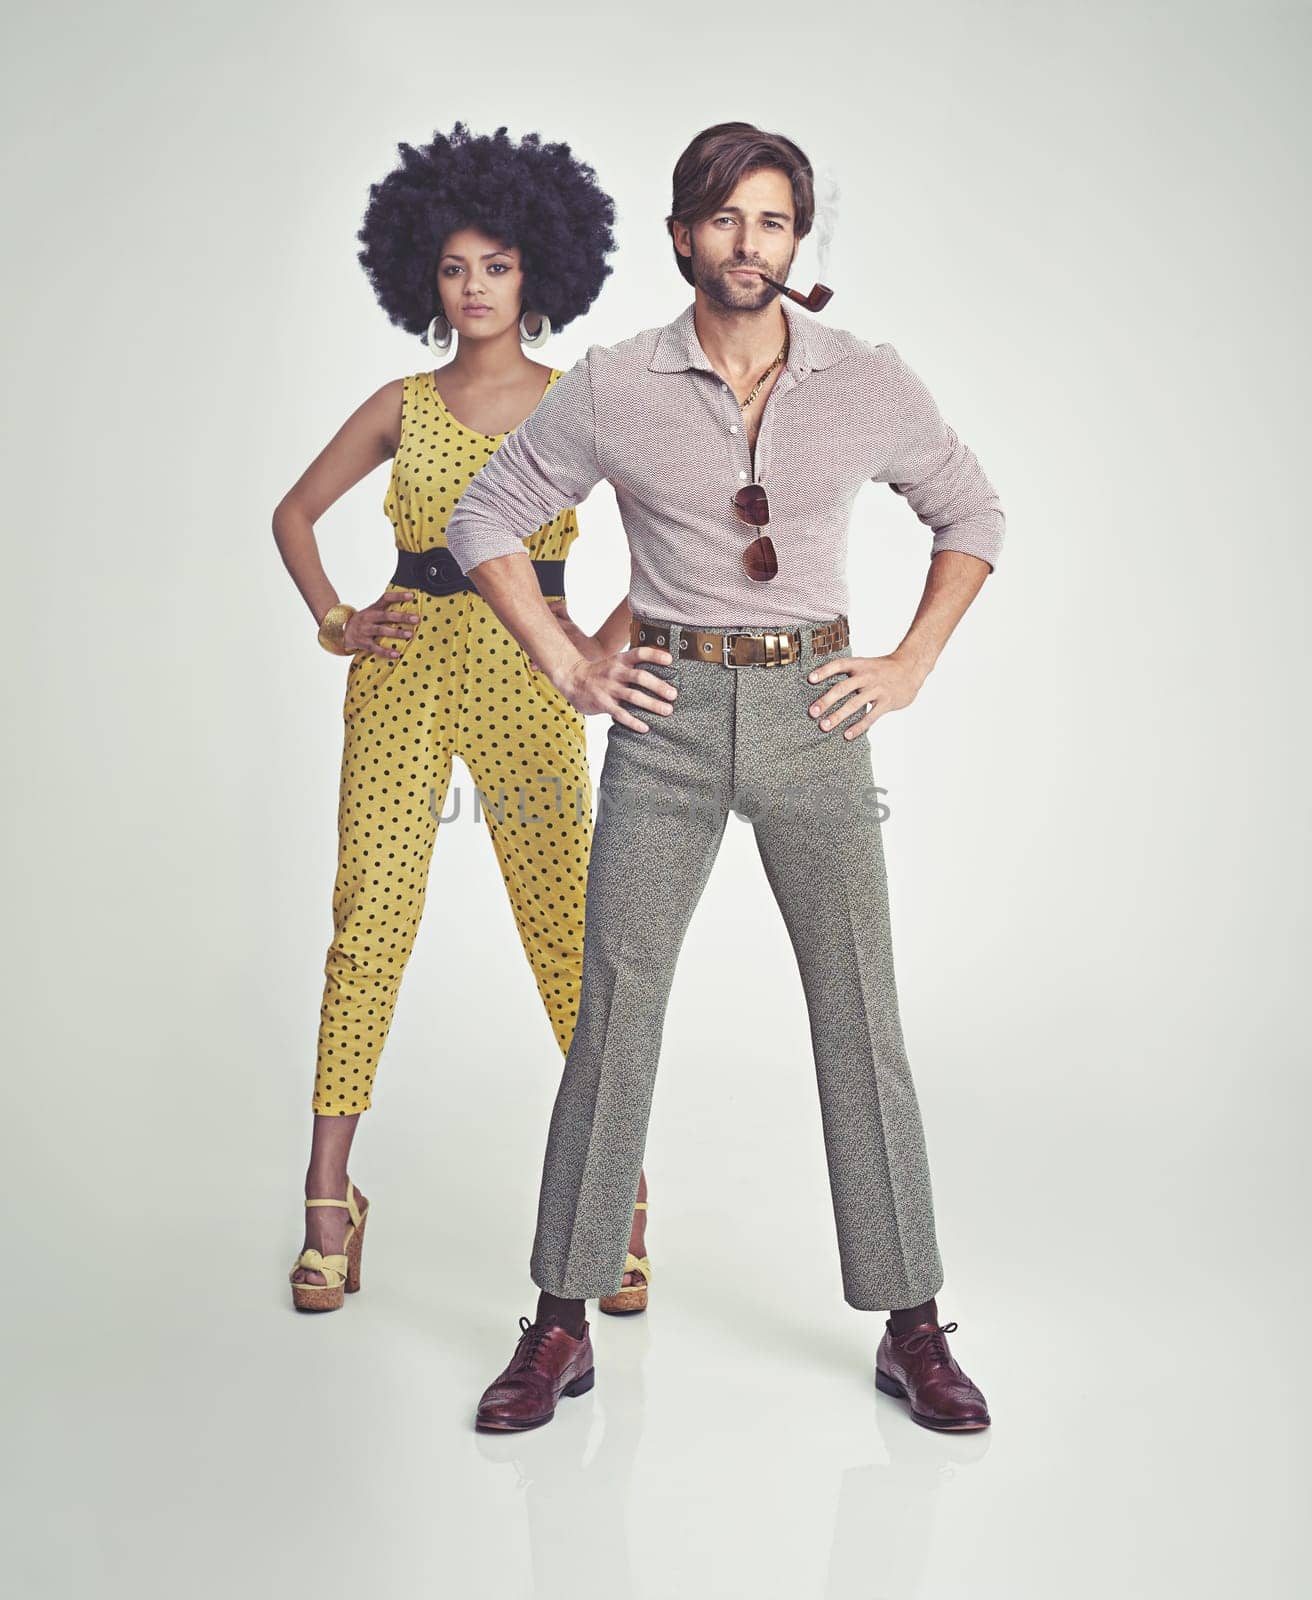 Couple, portrait and fashion in confidence with pipe for smoking, style or outfit on a gray studio background. Interracial man, woman or smoker in stylish retro and vintage pants, shirt or jumpsuit.